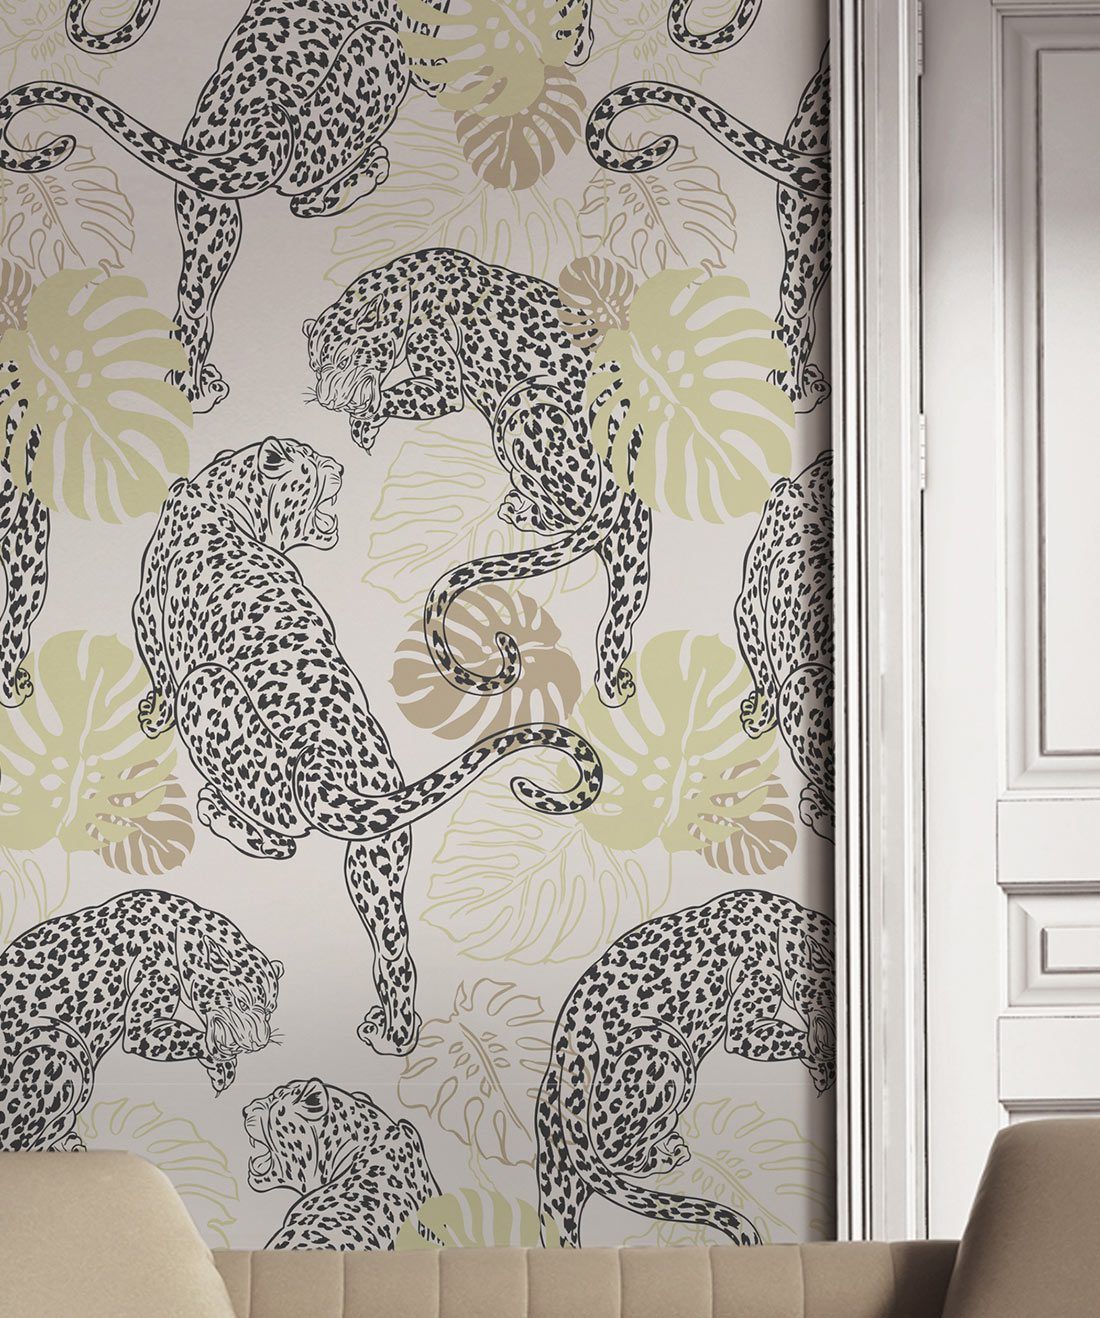 Enhance Your Walls with Stunning Leopard Wallpaper